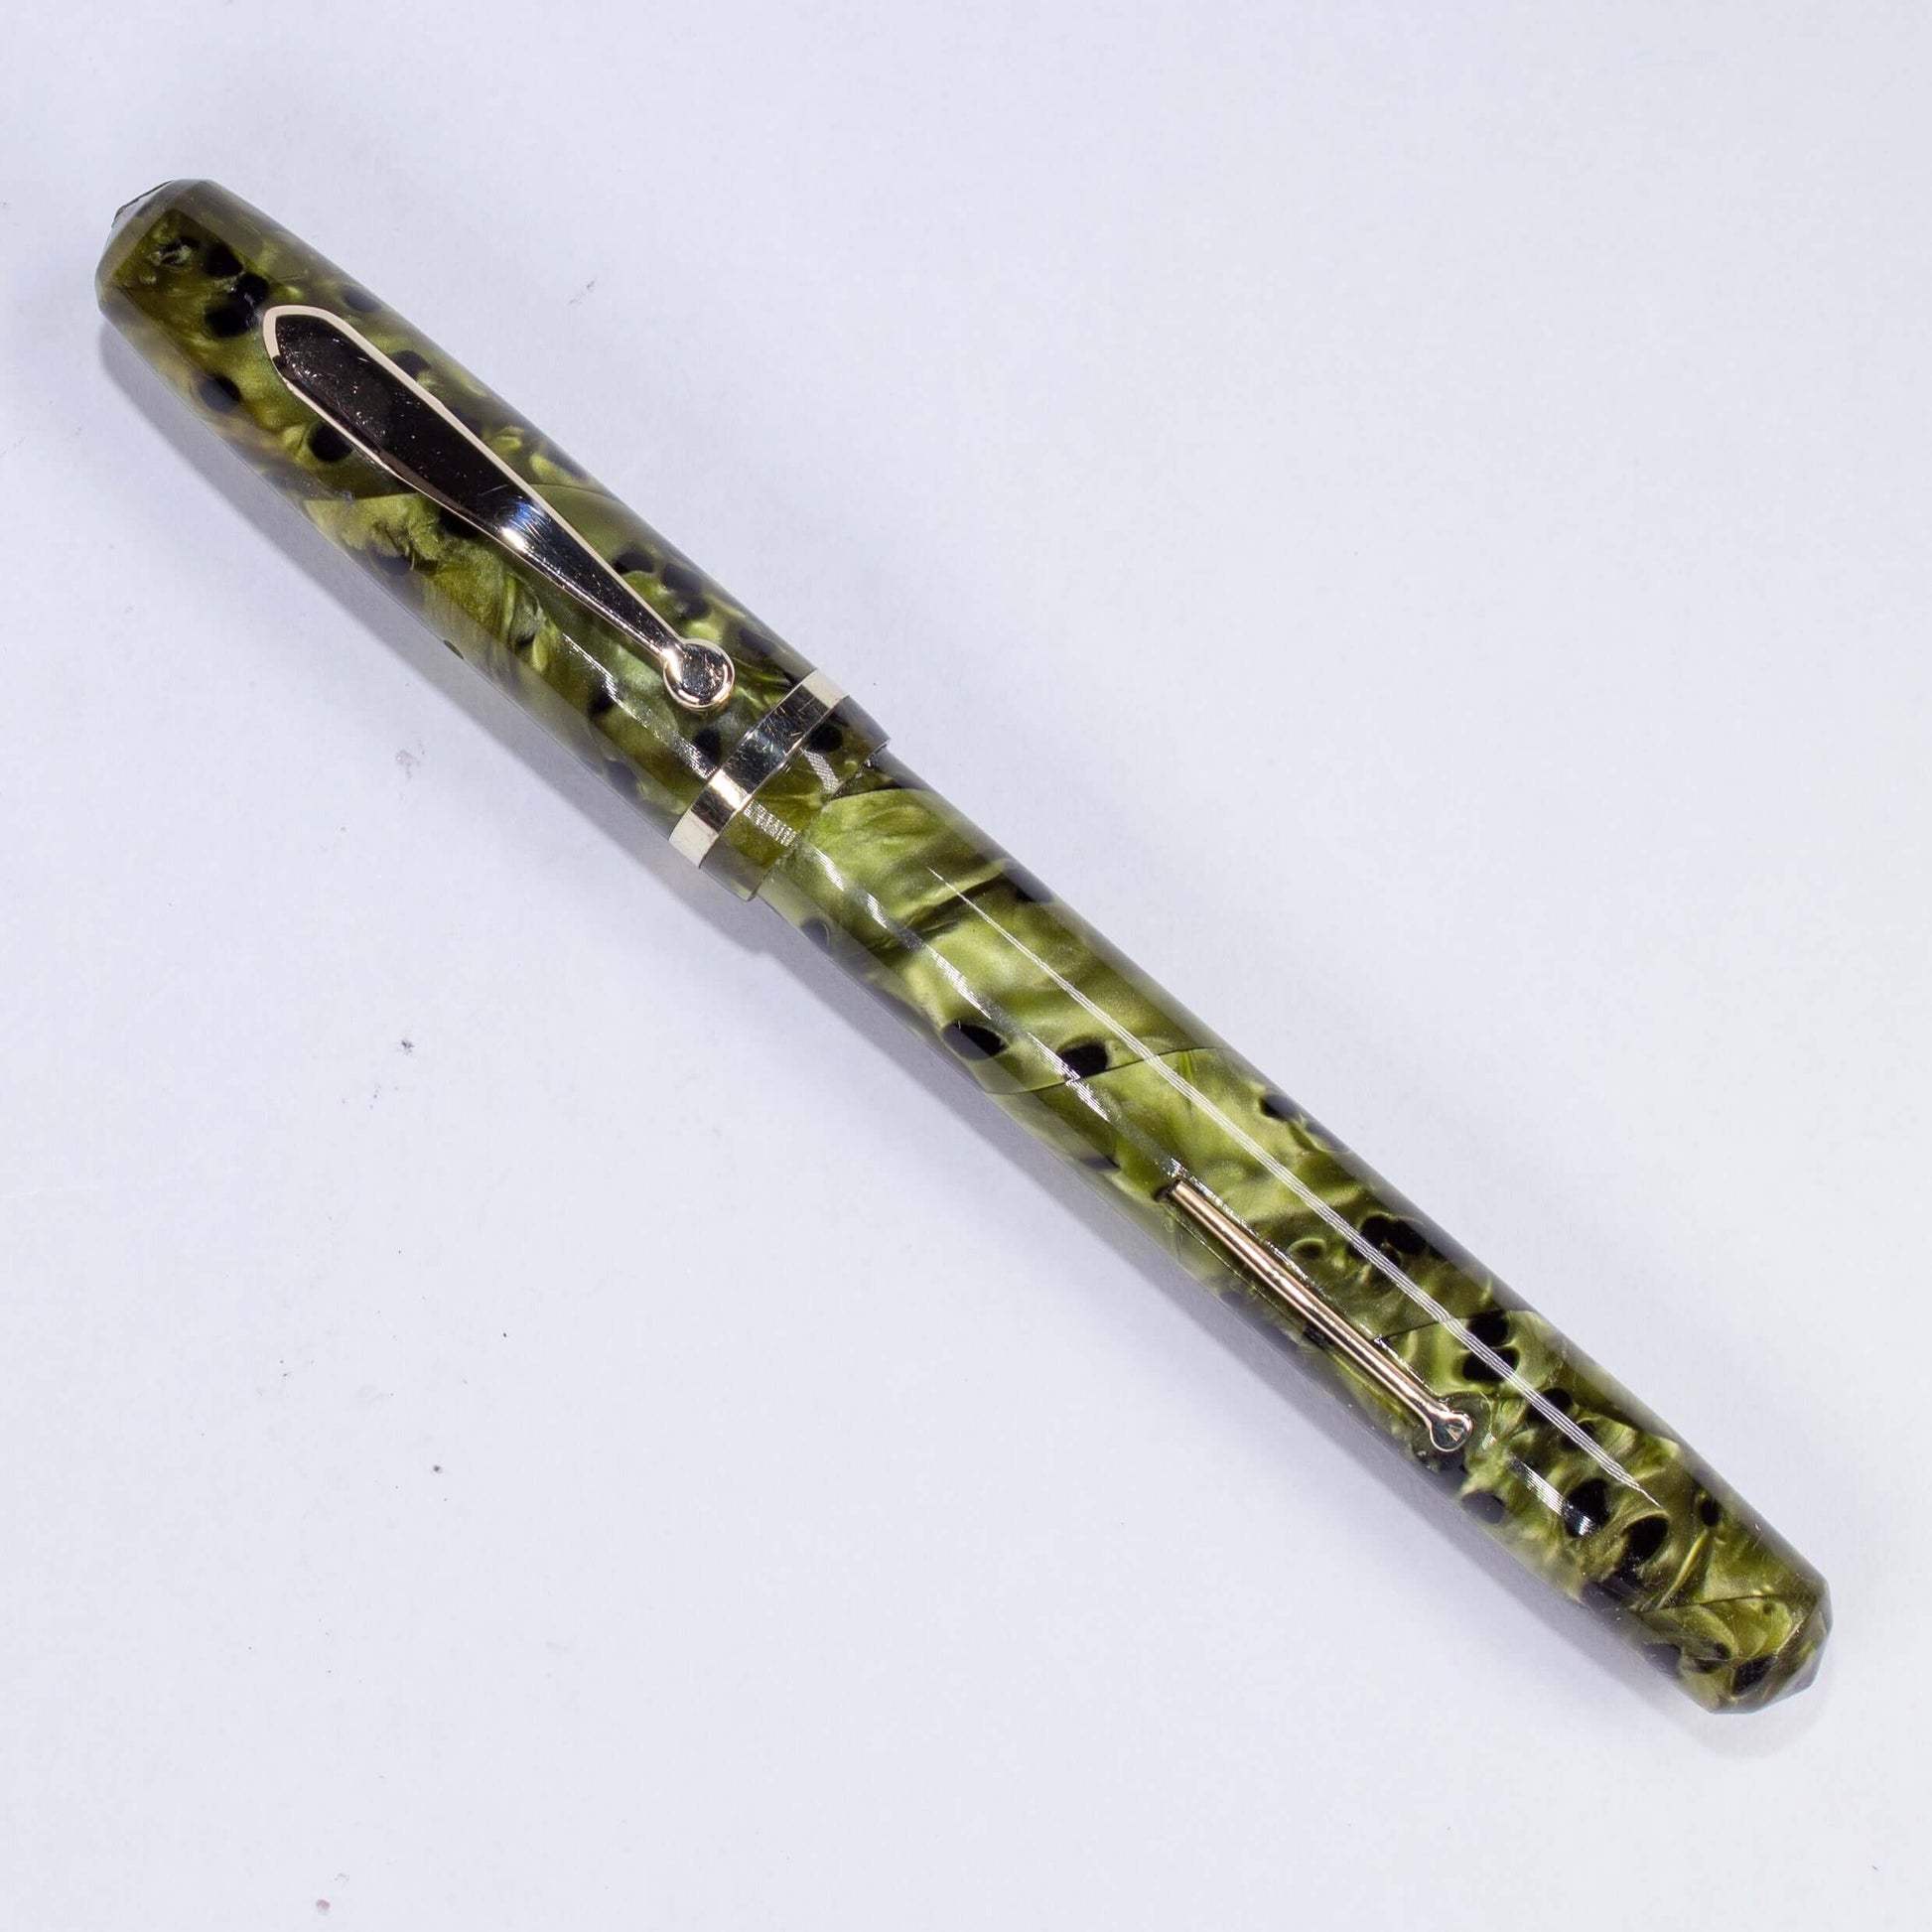 ${titleName/Type: Restored WASP Vacuum-fil Fountain Pen Manufacture Year: Circa 1930s Length: 5 Filling System: Lever Filler Color/Pattern: Green Birdseye, some refer to this color as Screaming Souls in Purgatory. Nib Type/Condition and remarks: 12K Gold